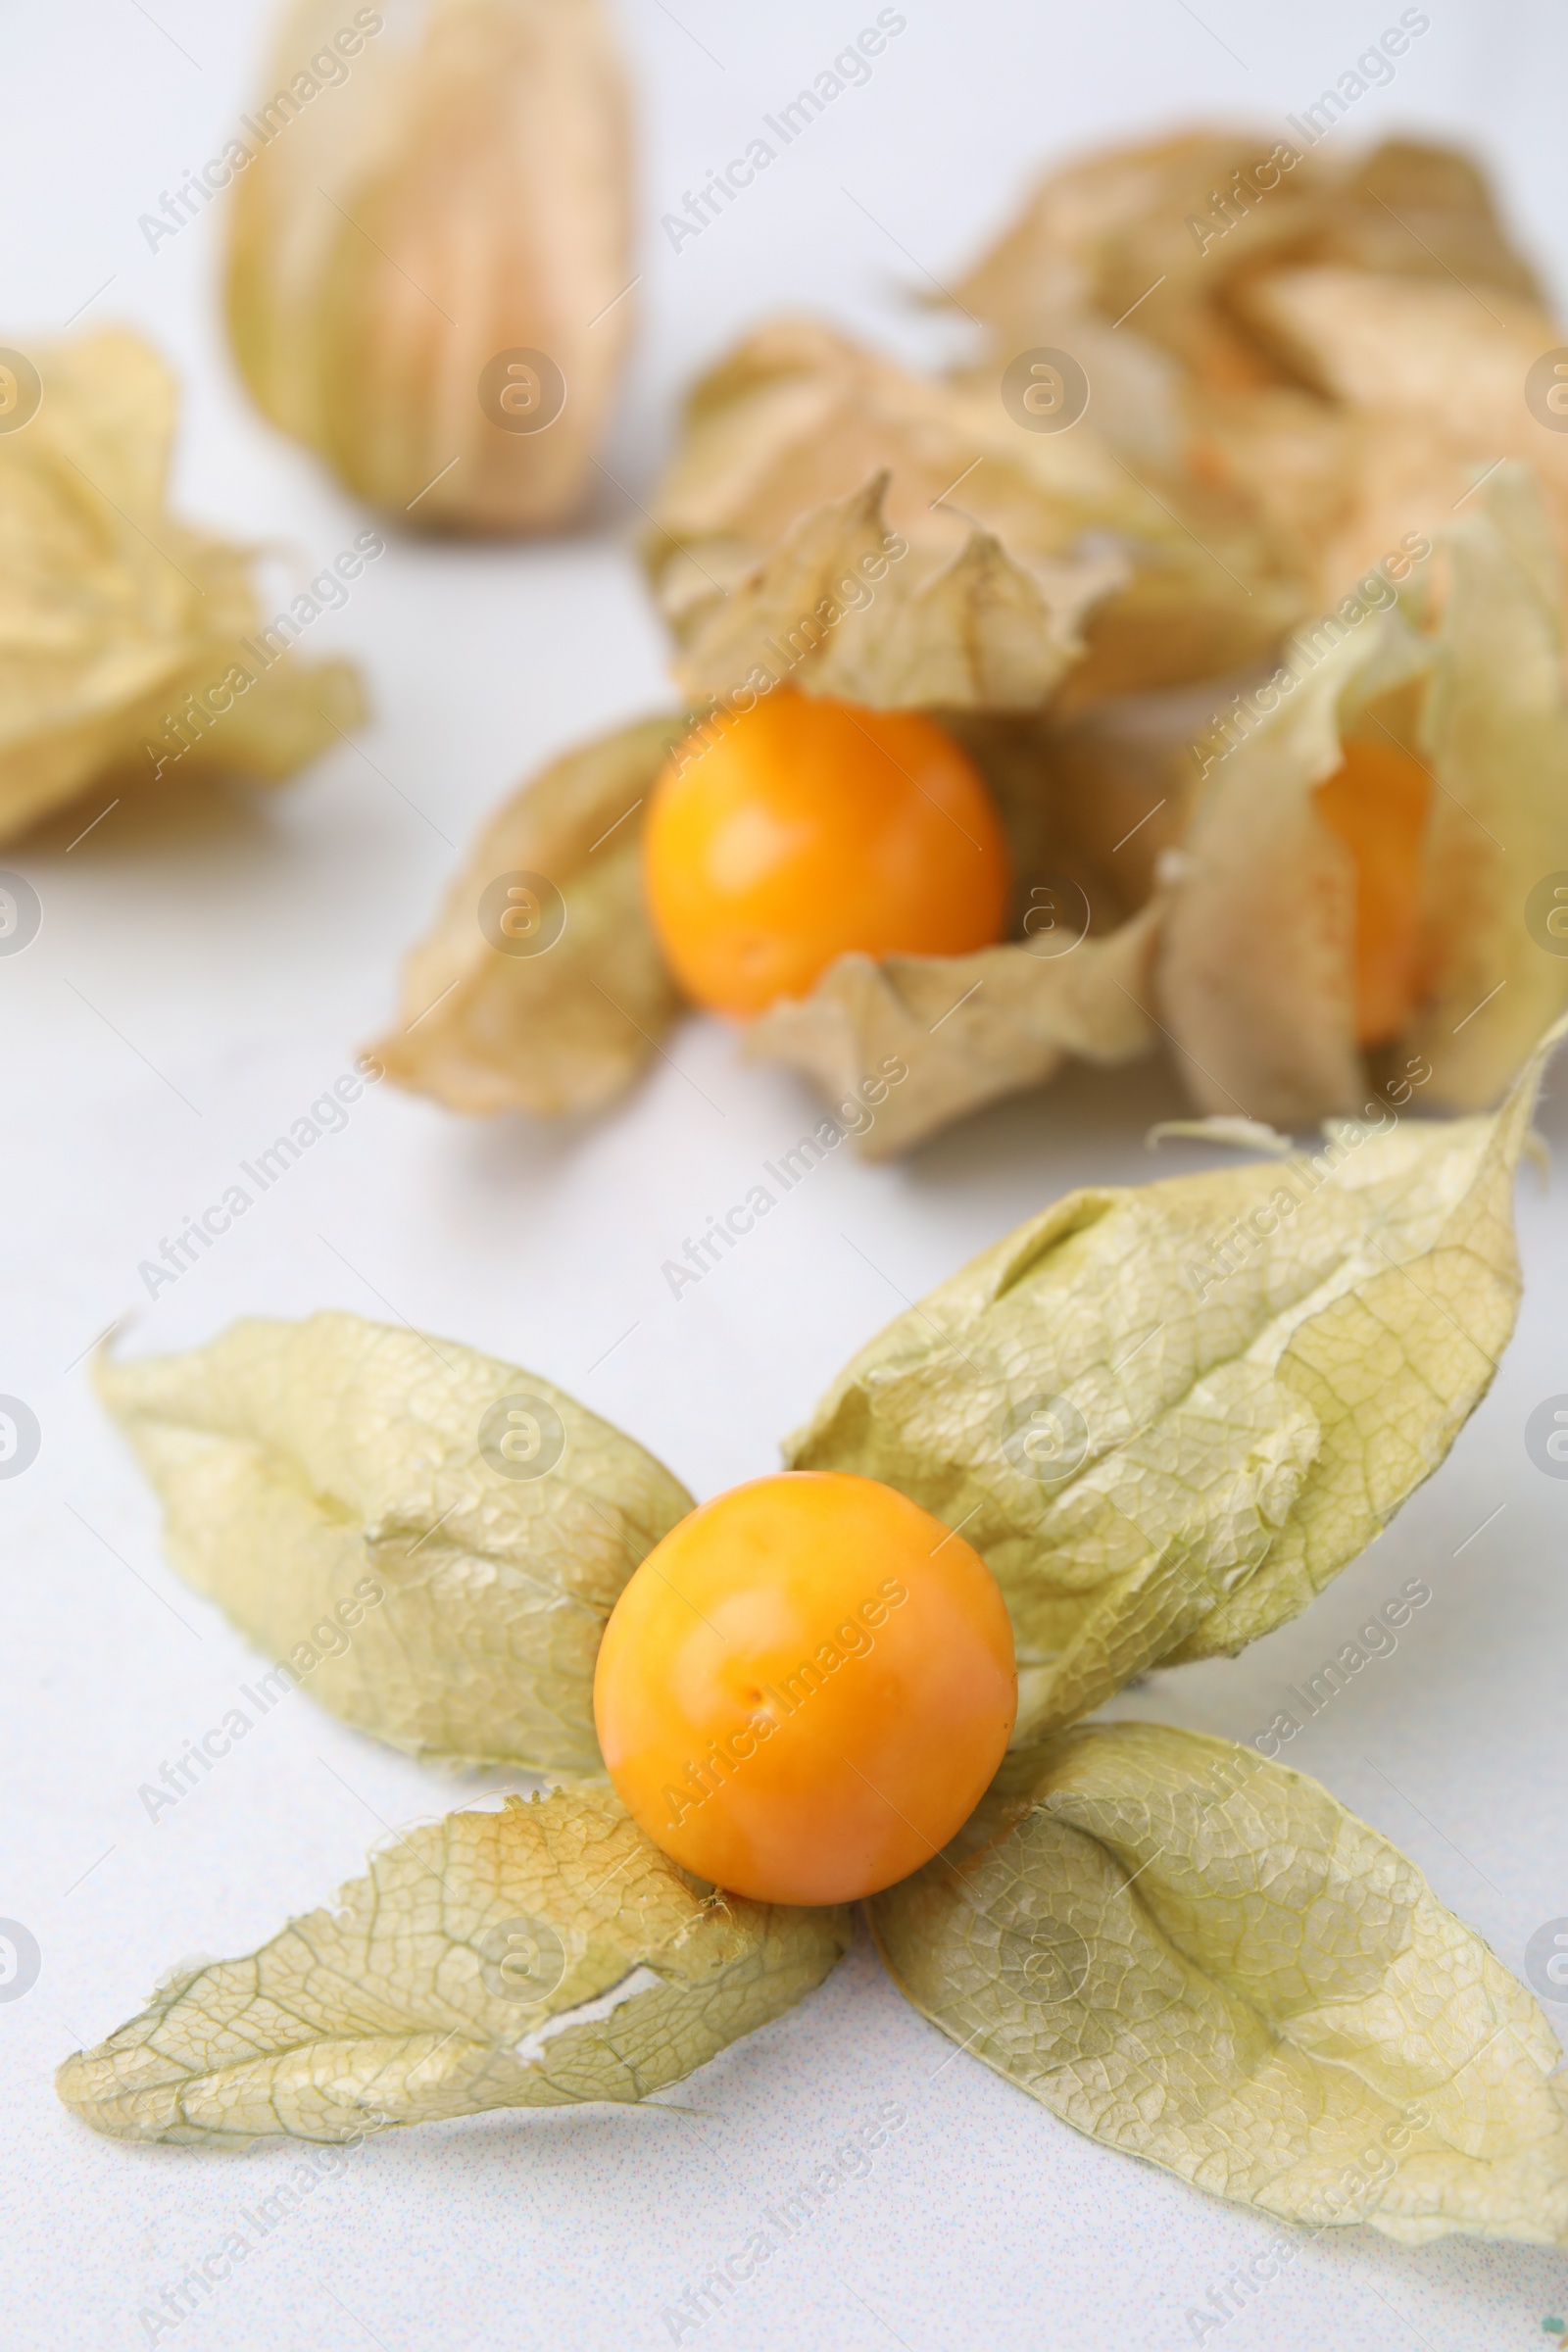 Photo of Ripe physalis fruits with calyxes on white marble table, closeup